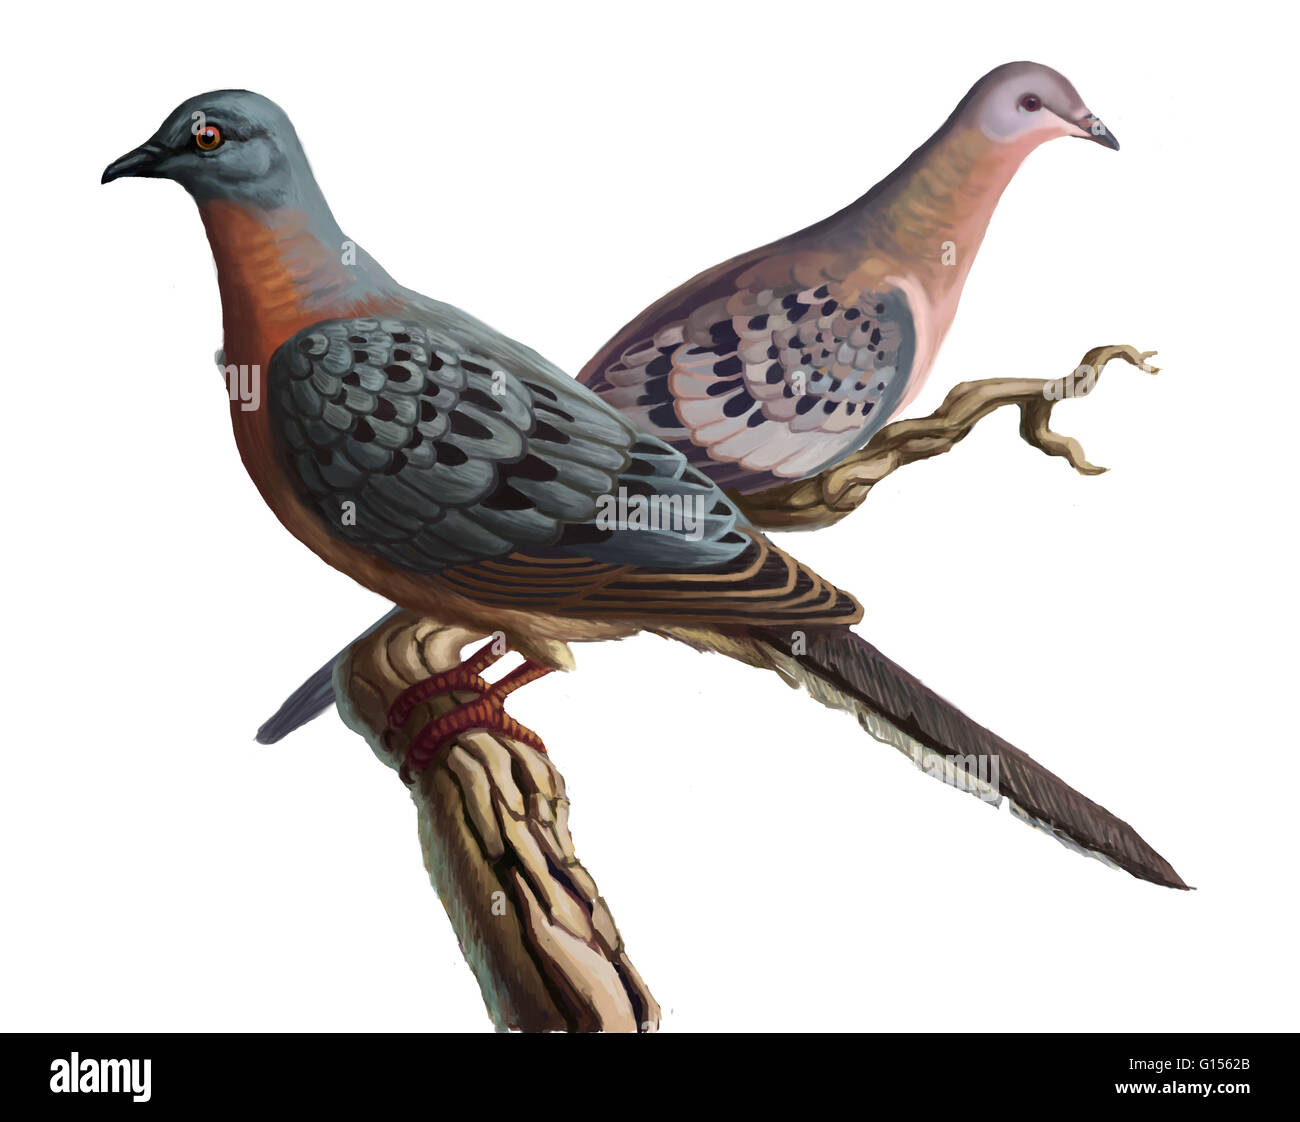 Illustration of the extinct Passenger Pigeon, Ectopistes migratorius, once the most abundant bird in North America. By the early 20th century it was extinct due to European encroachment on their territory and over hunting for use as cheap food for slaves. Stock Photo